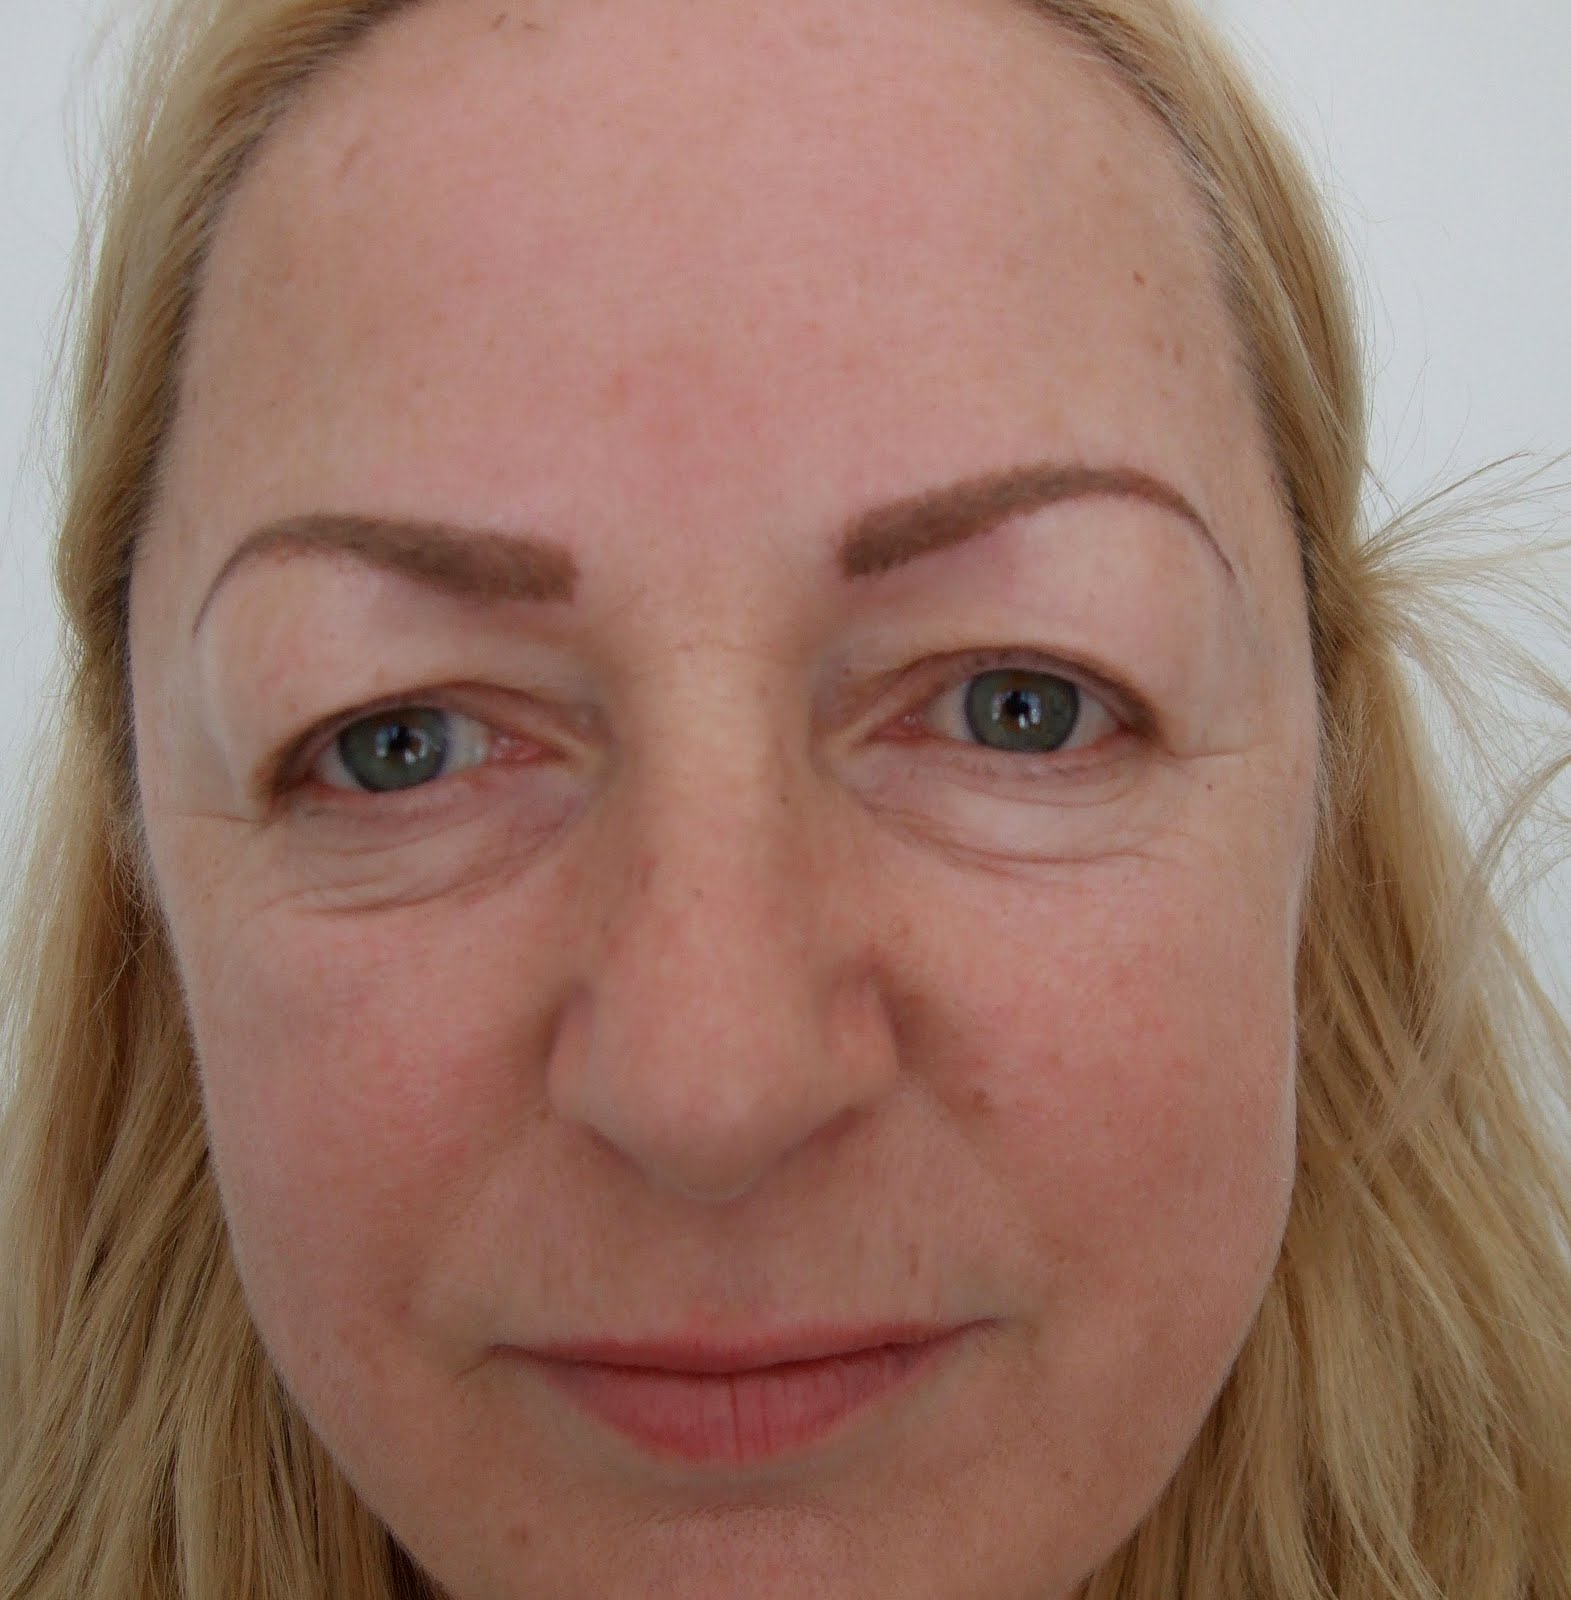 Tattooing Eyebrows Melbourne